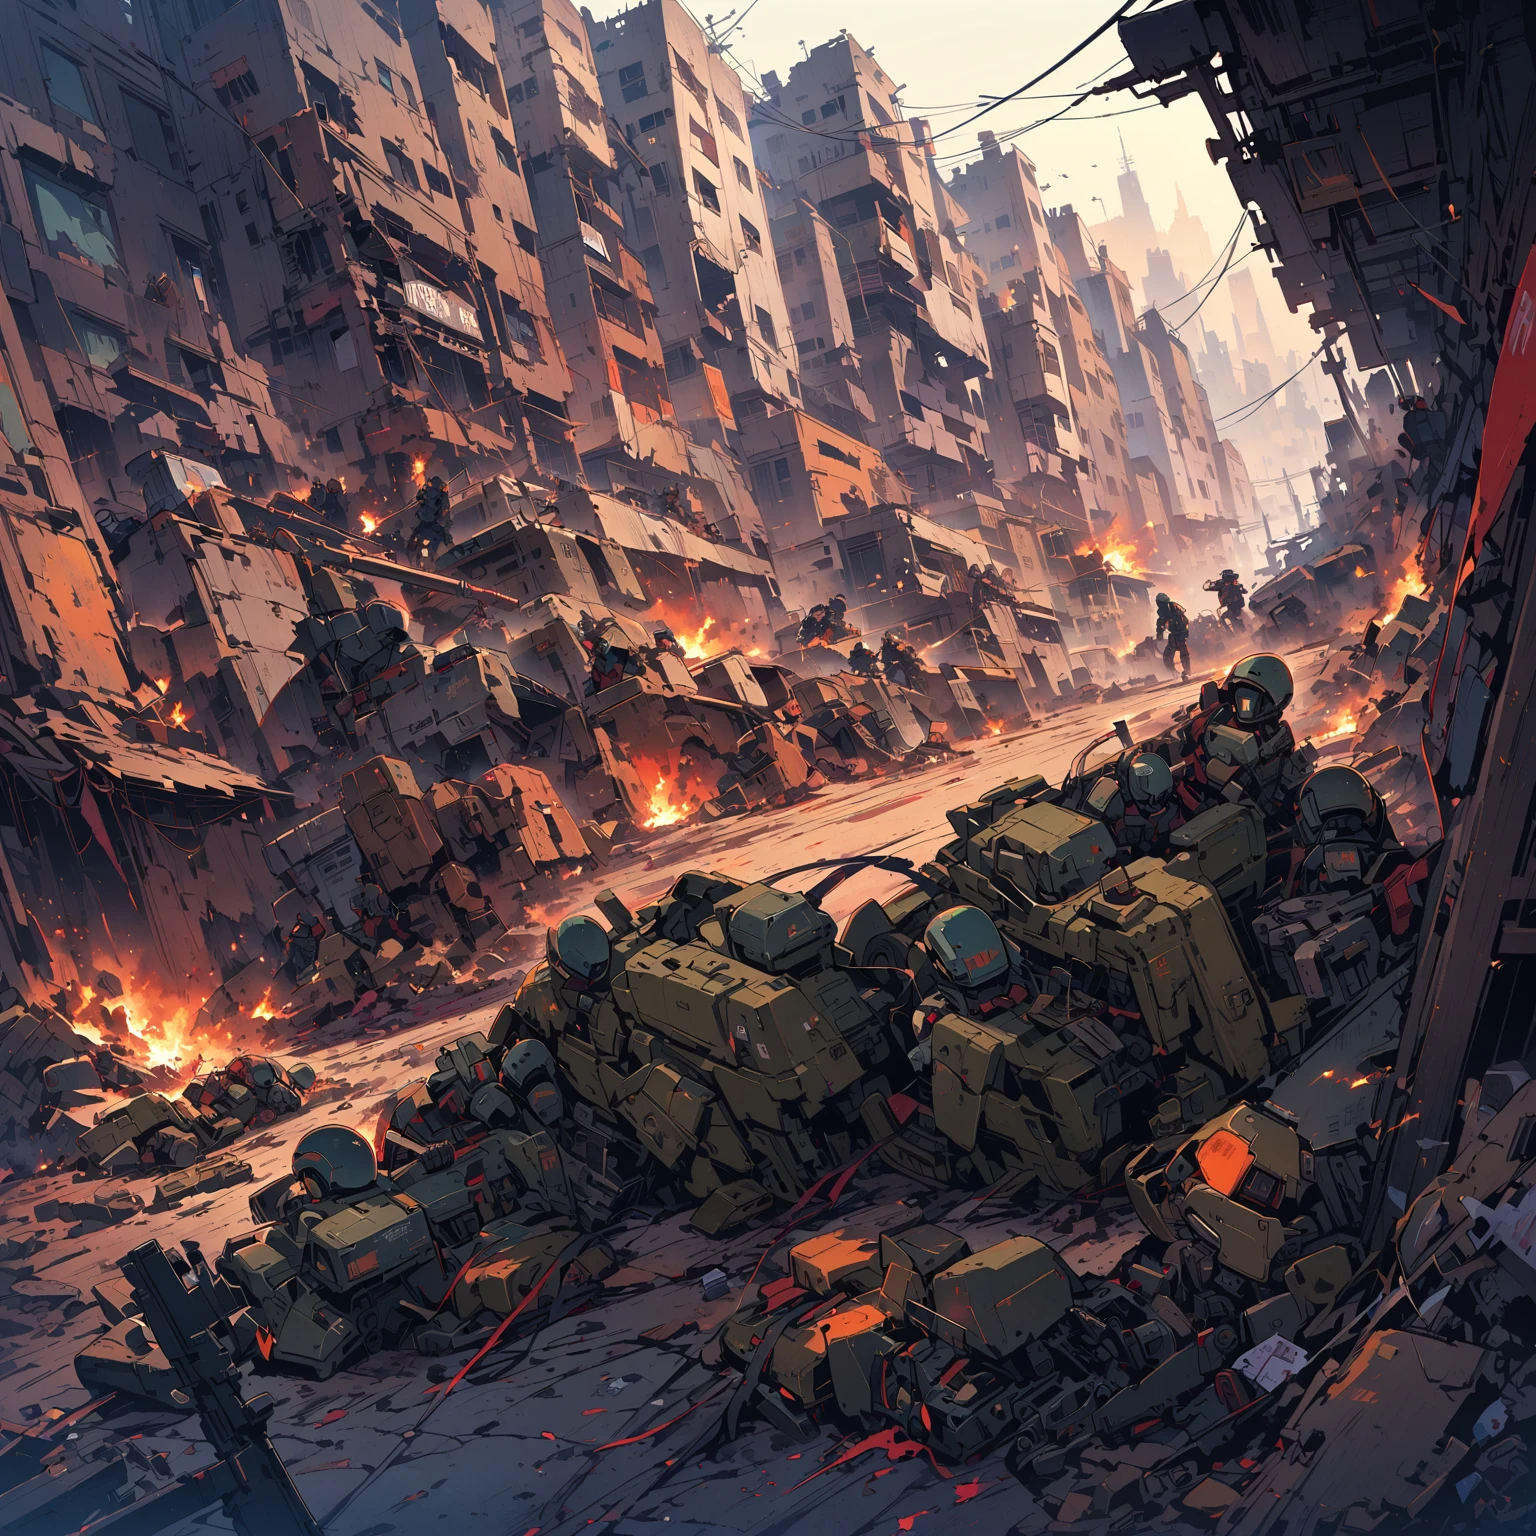 Depicting the horrors of war in detail、The battlefield where the long war came to an end、The destroyed cityscape、Combat weapon robots and combat vehicles that have been shot down and are no longer functioning、A soldier sits on his helmet at the foot of a broken robot and bows his head、He looks very tired、Soldier leaning against wall、An injured soldier being carried、Soldiers who couldn&#39;t move、The fallen soldier&#39;s corpse、A sinkhole on the road caused by an explosion、Bombing Trails、Gunshot wounds、A scorched city、{{masterpiece、highest quality、(((Realistic、Realistic:1.37)))、8K quality、It&#39;s so tragic and horrible.、Pain々Shii、Large file size、Very detailed、Very detailed、Cinema Lighting}}